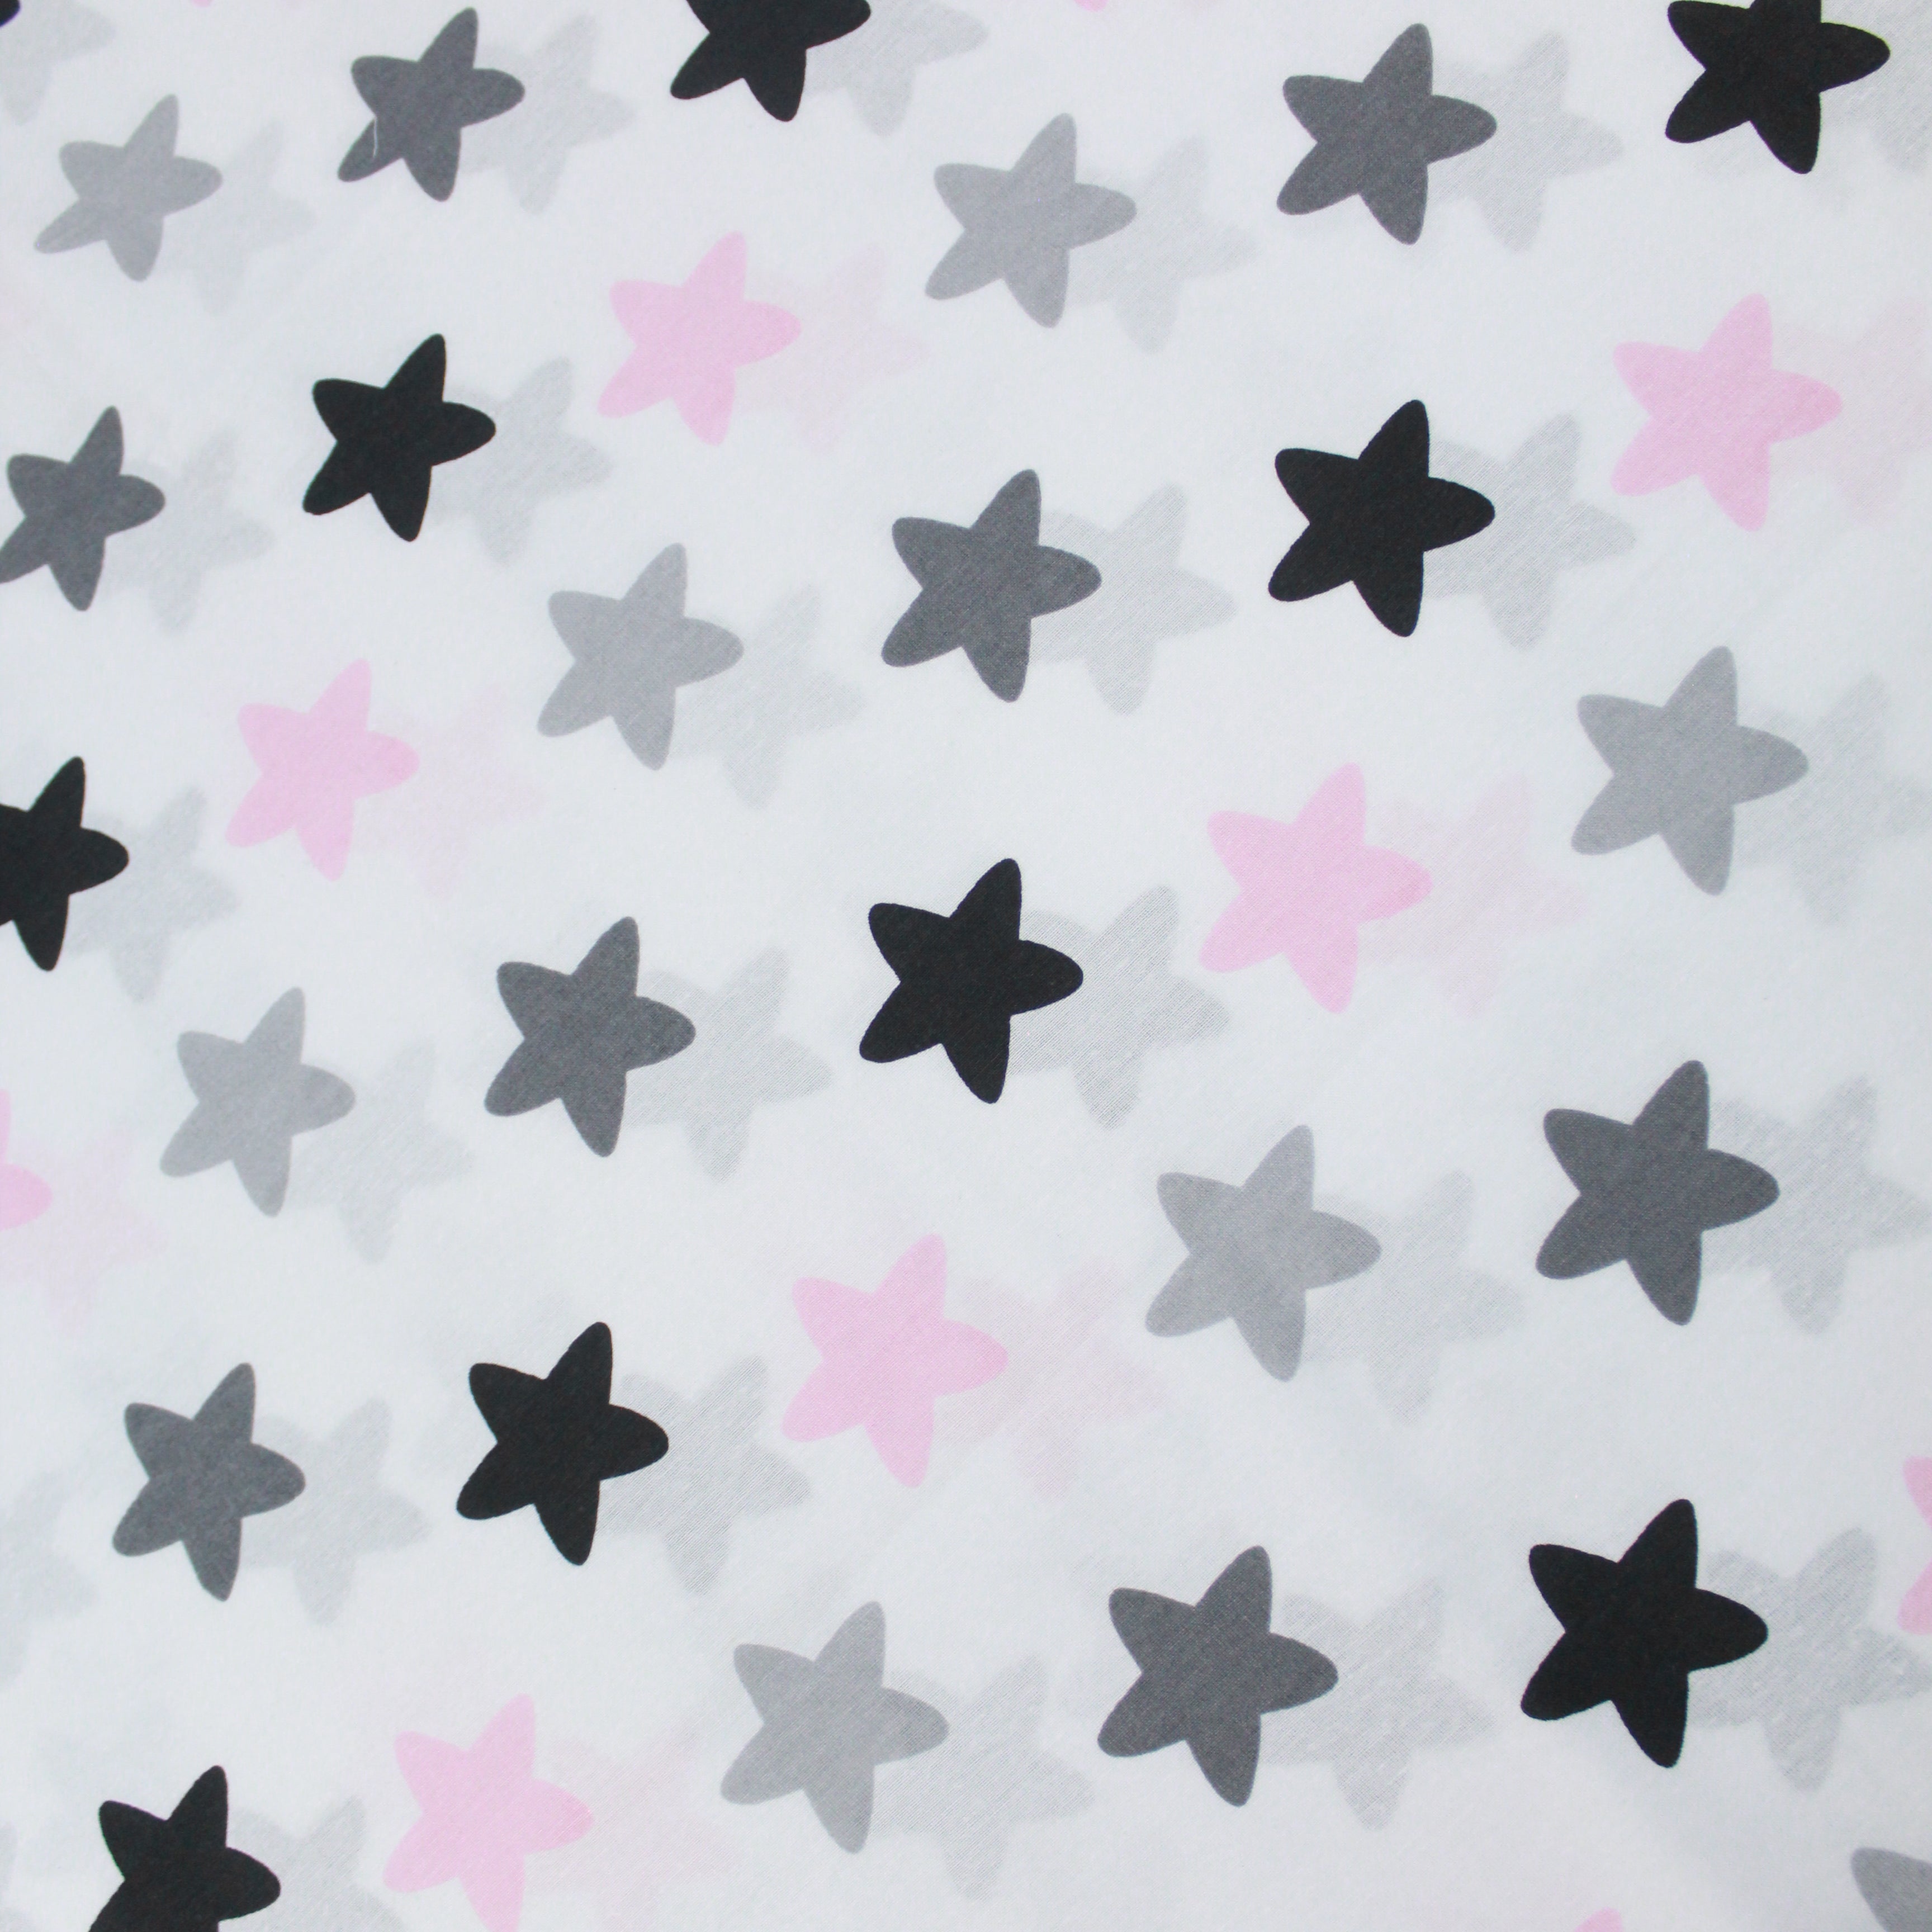 Premium Quality Super Wide Cotton Blend Sheeting "Bold Funky Stars" 94" Wide White